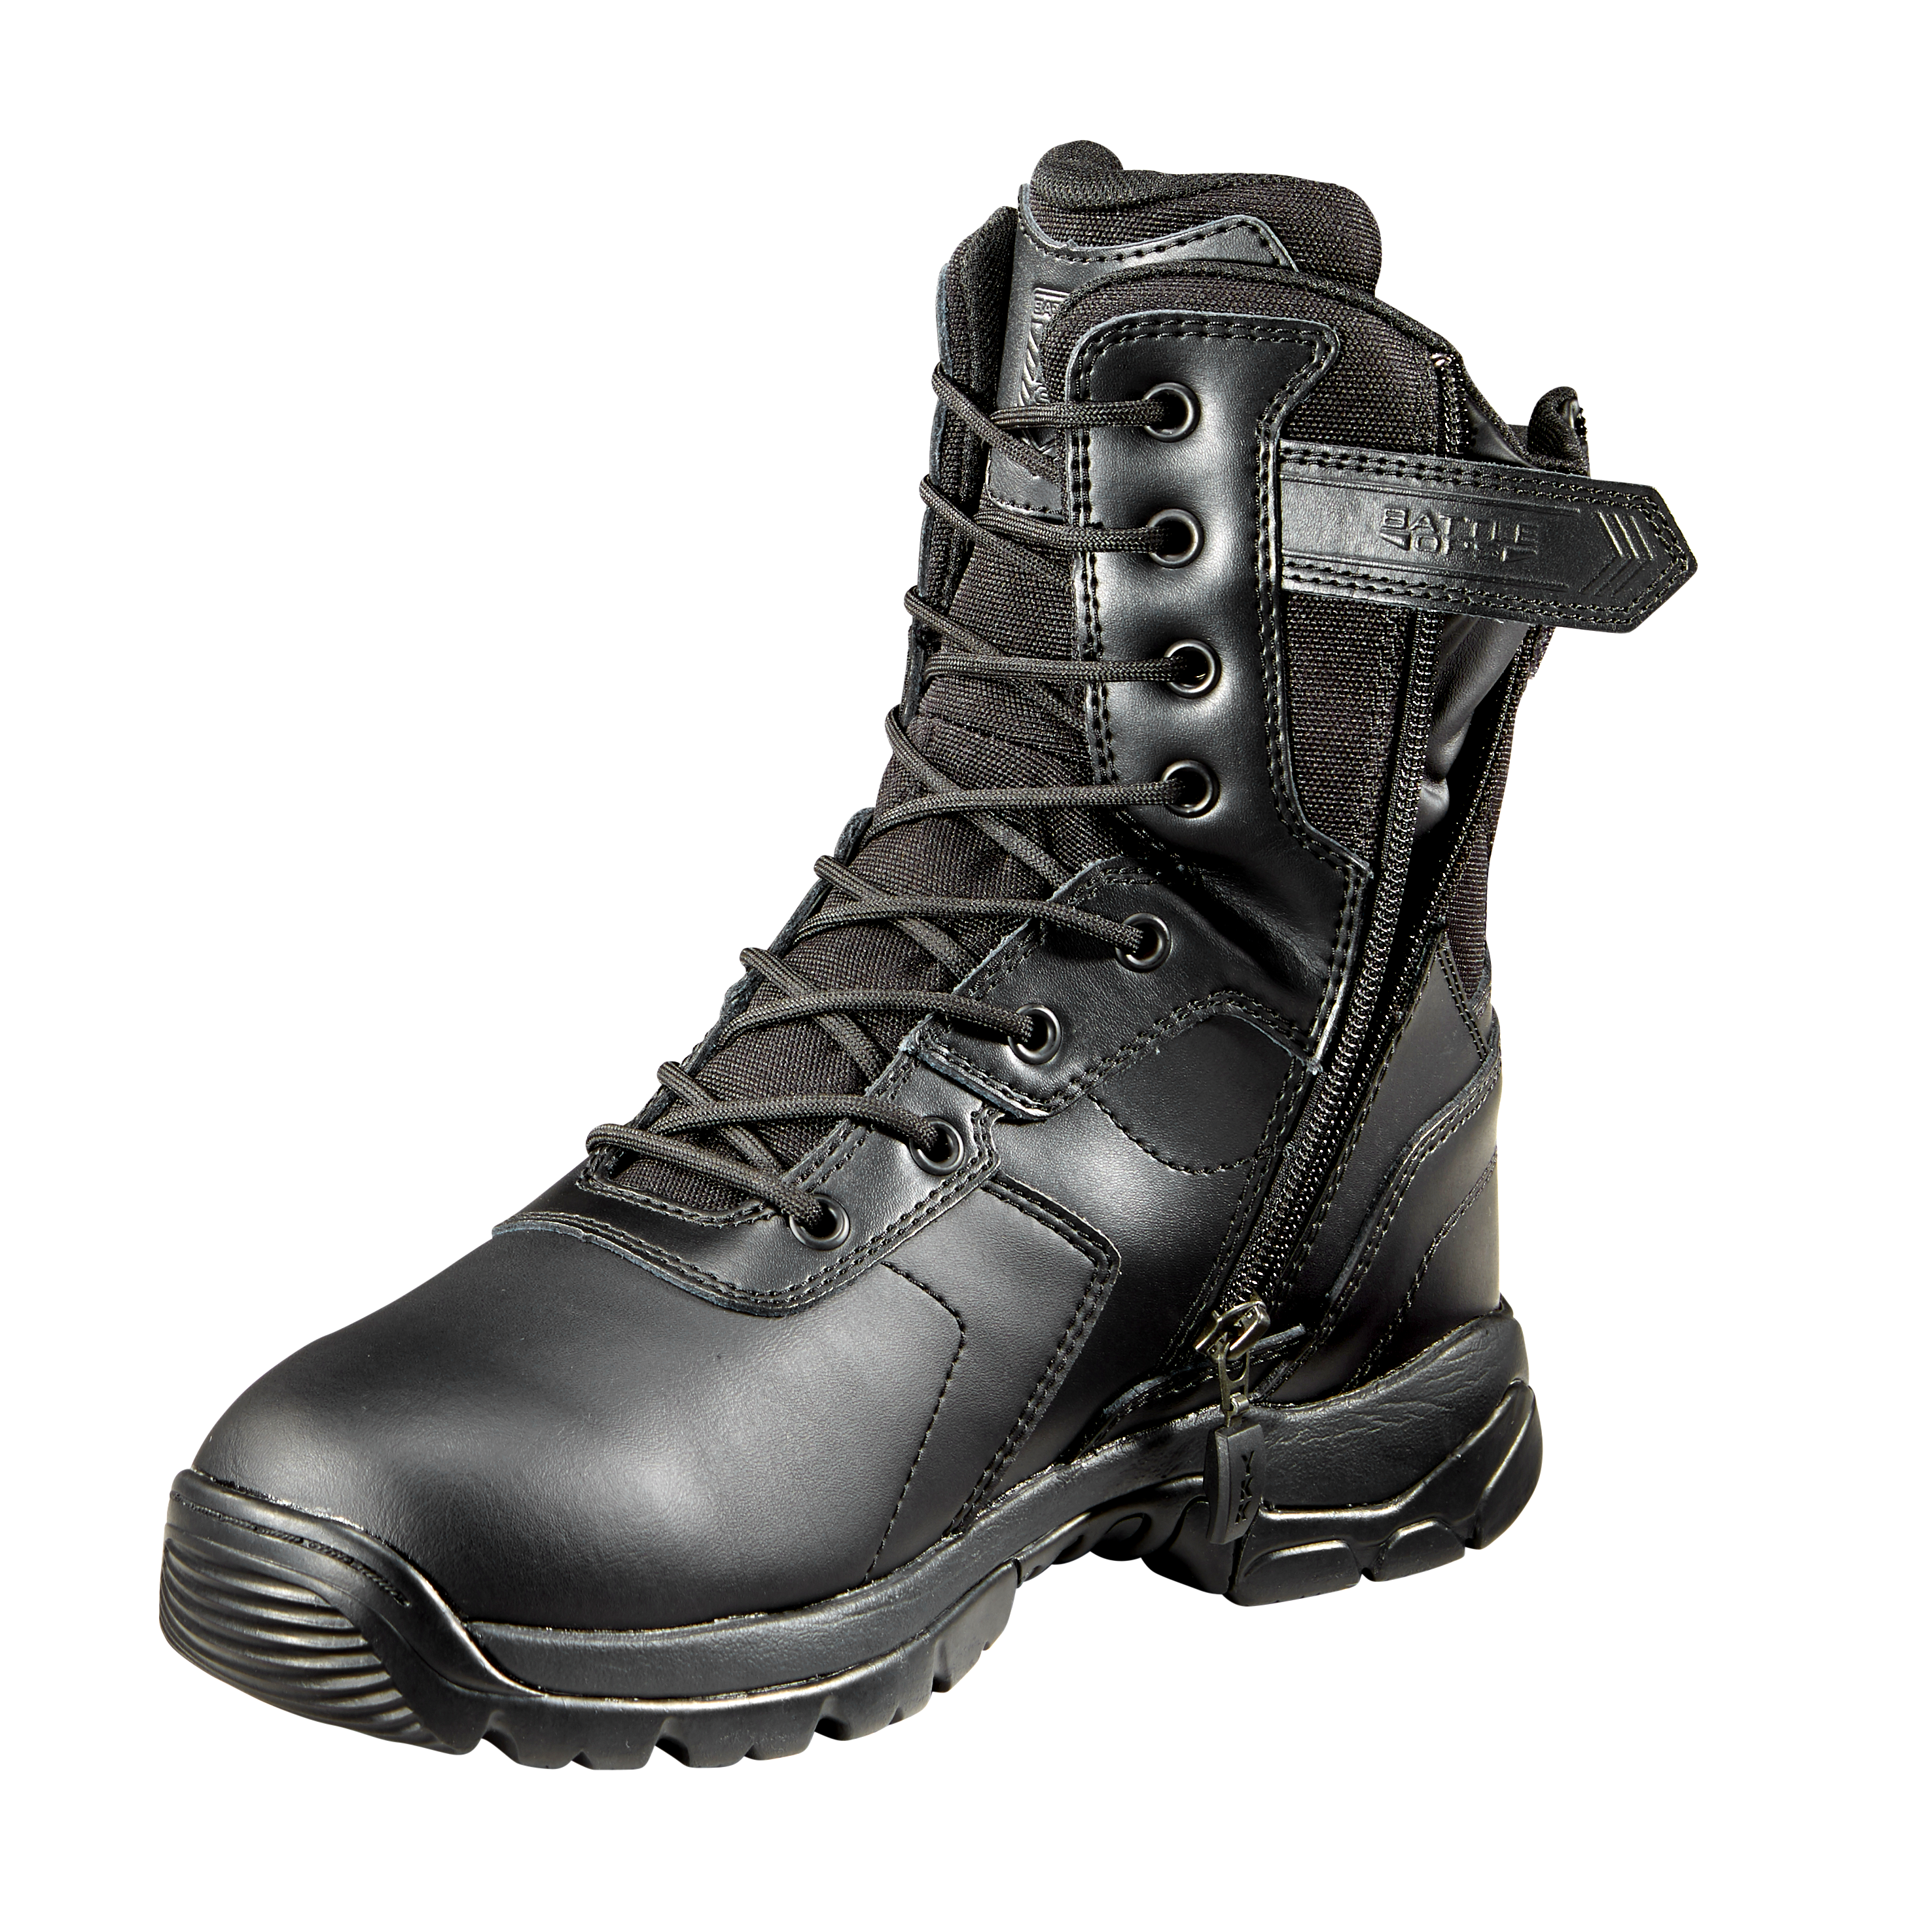 8-inch Waterproof Black Tactical Boot - Side Zip & Comp Safety Toe